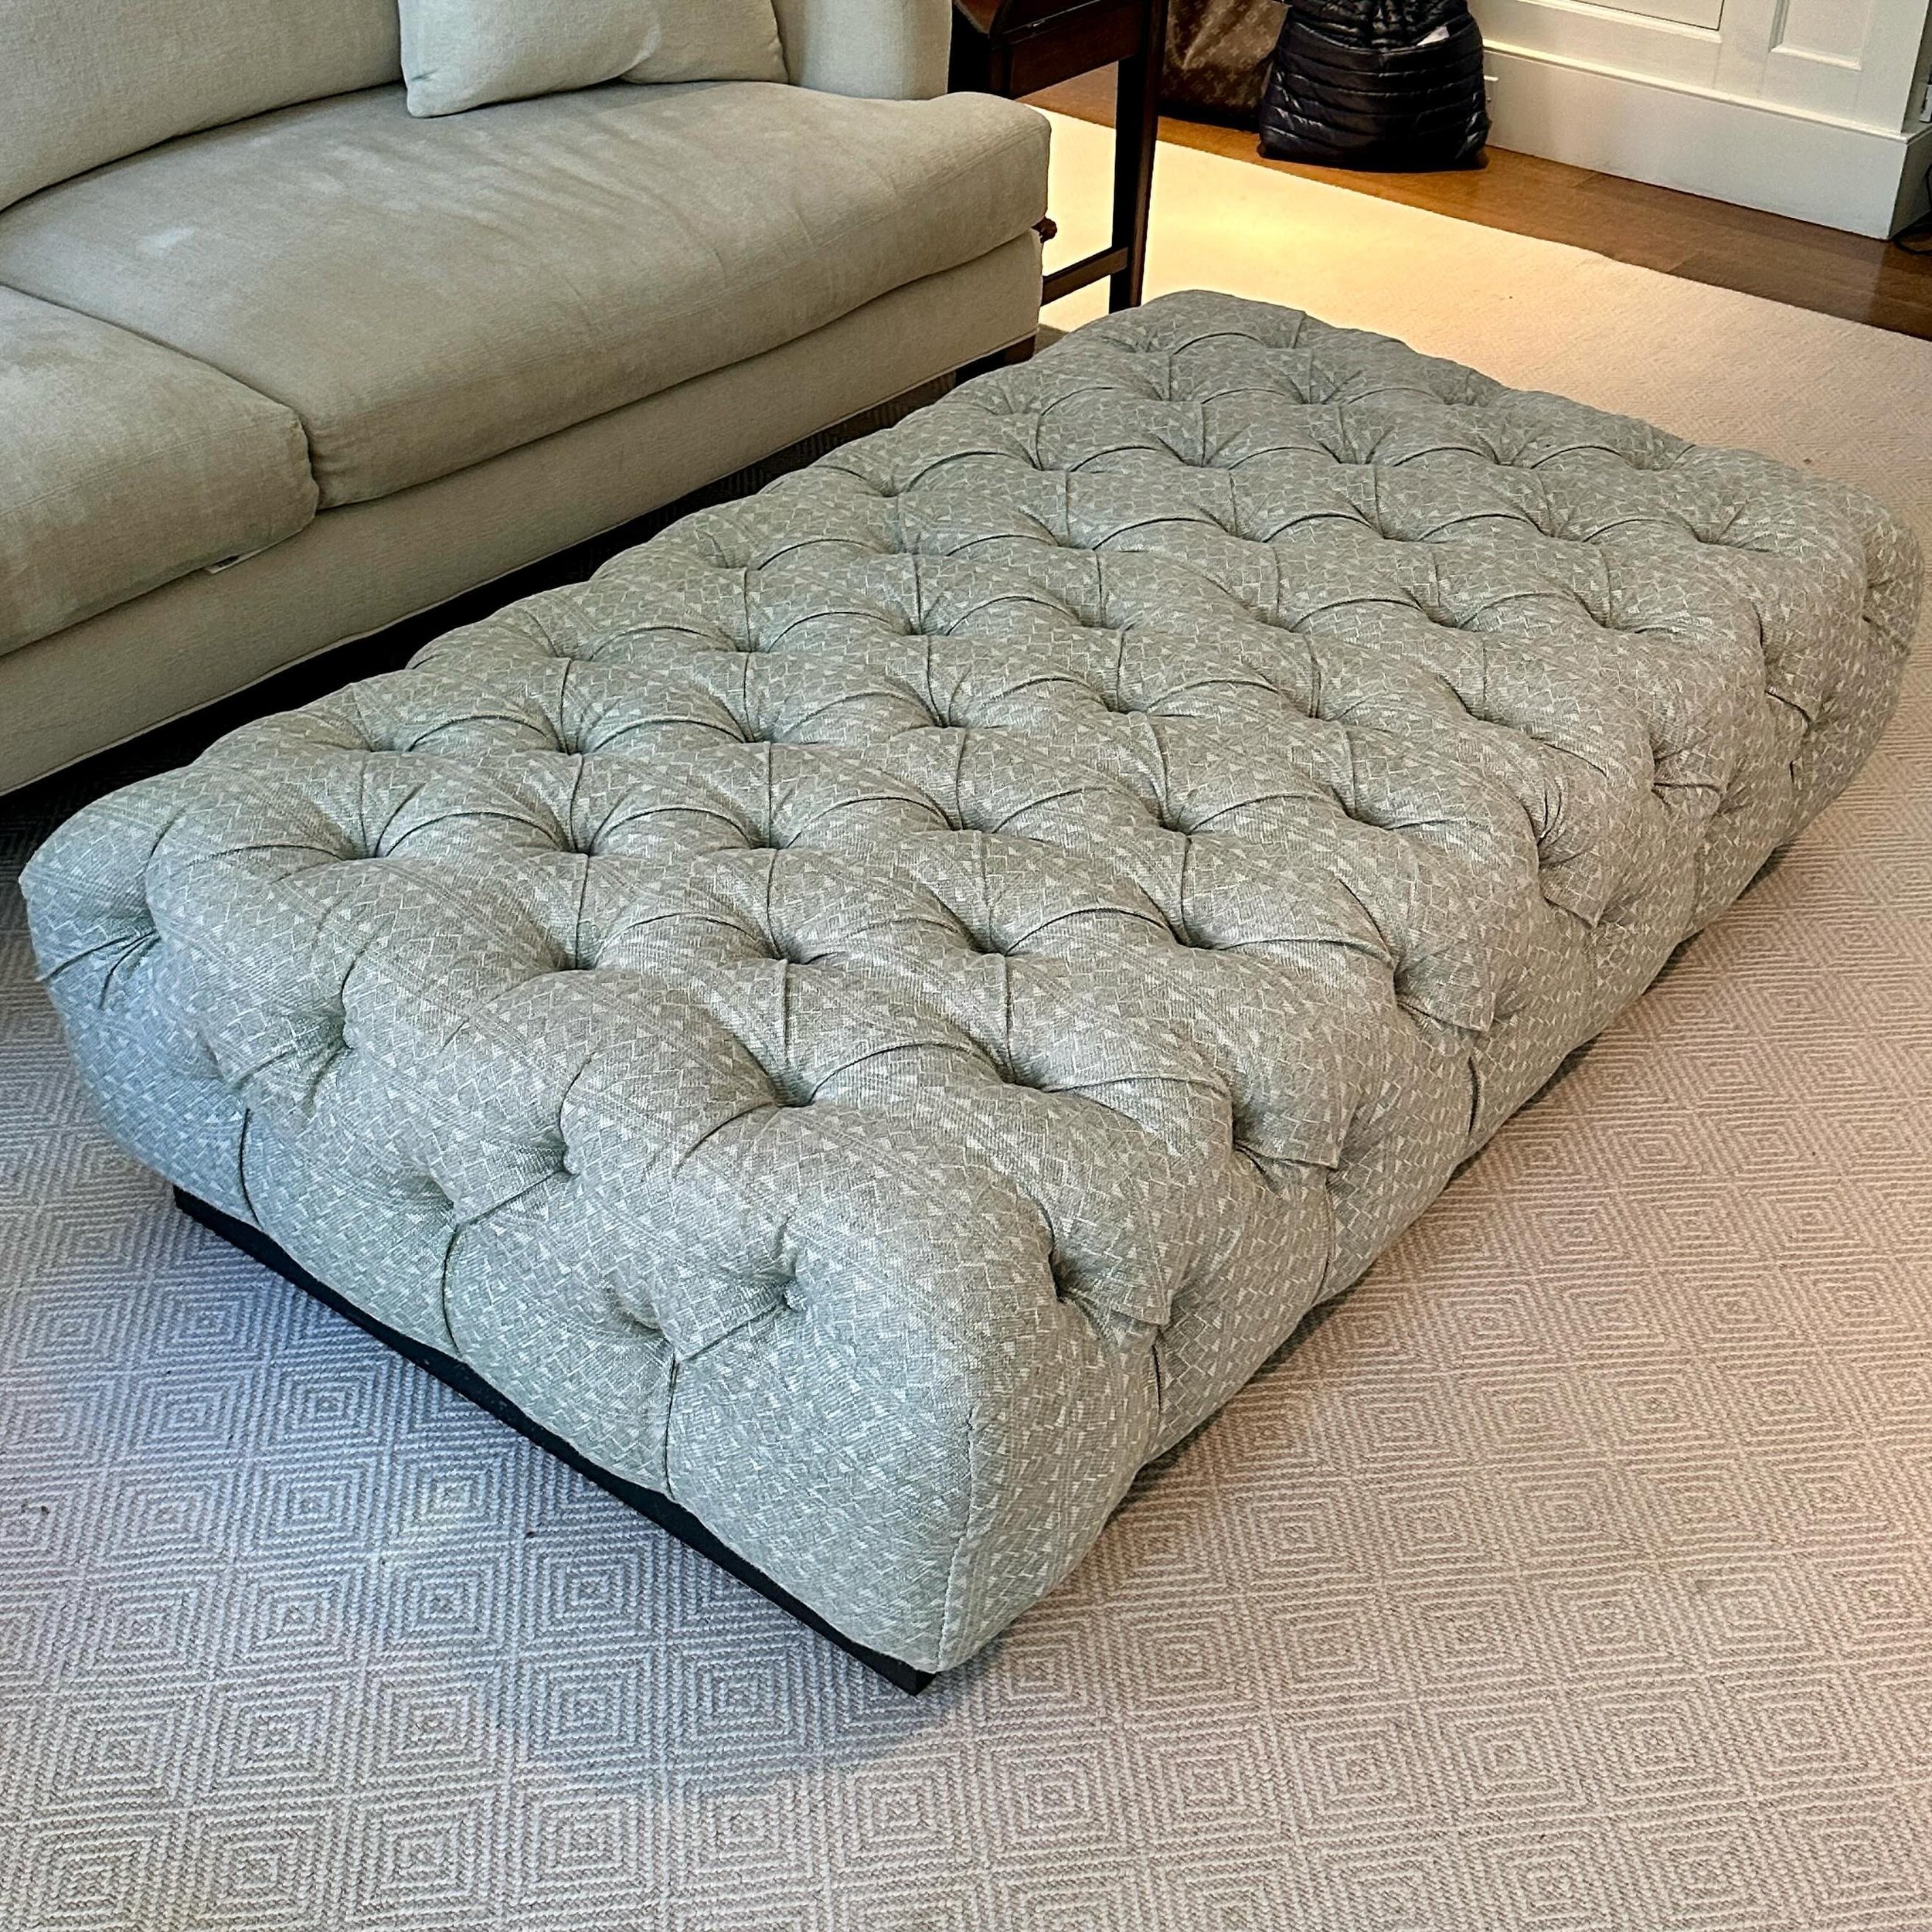 We CAN have nice things!

🔸 Lee Tufted Ottoman with Fermoie Fabric
.
.
.
.
.
@leeindustries
#LeeIndustries 
#LEELovesDesign 
@fermoie
#thejoyoffermoie
#fermoiefabrics
#finefabrics
#liveartfully
#chairishbydesign 
#gonegirlhome